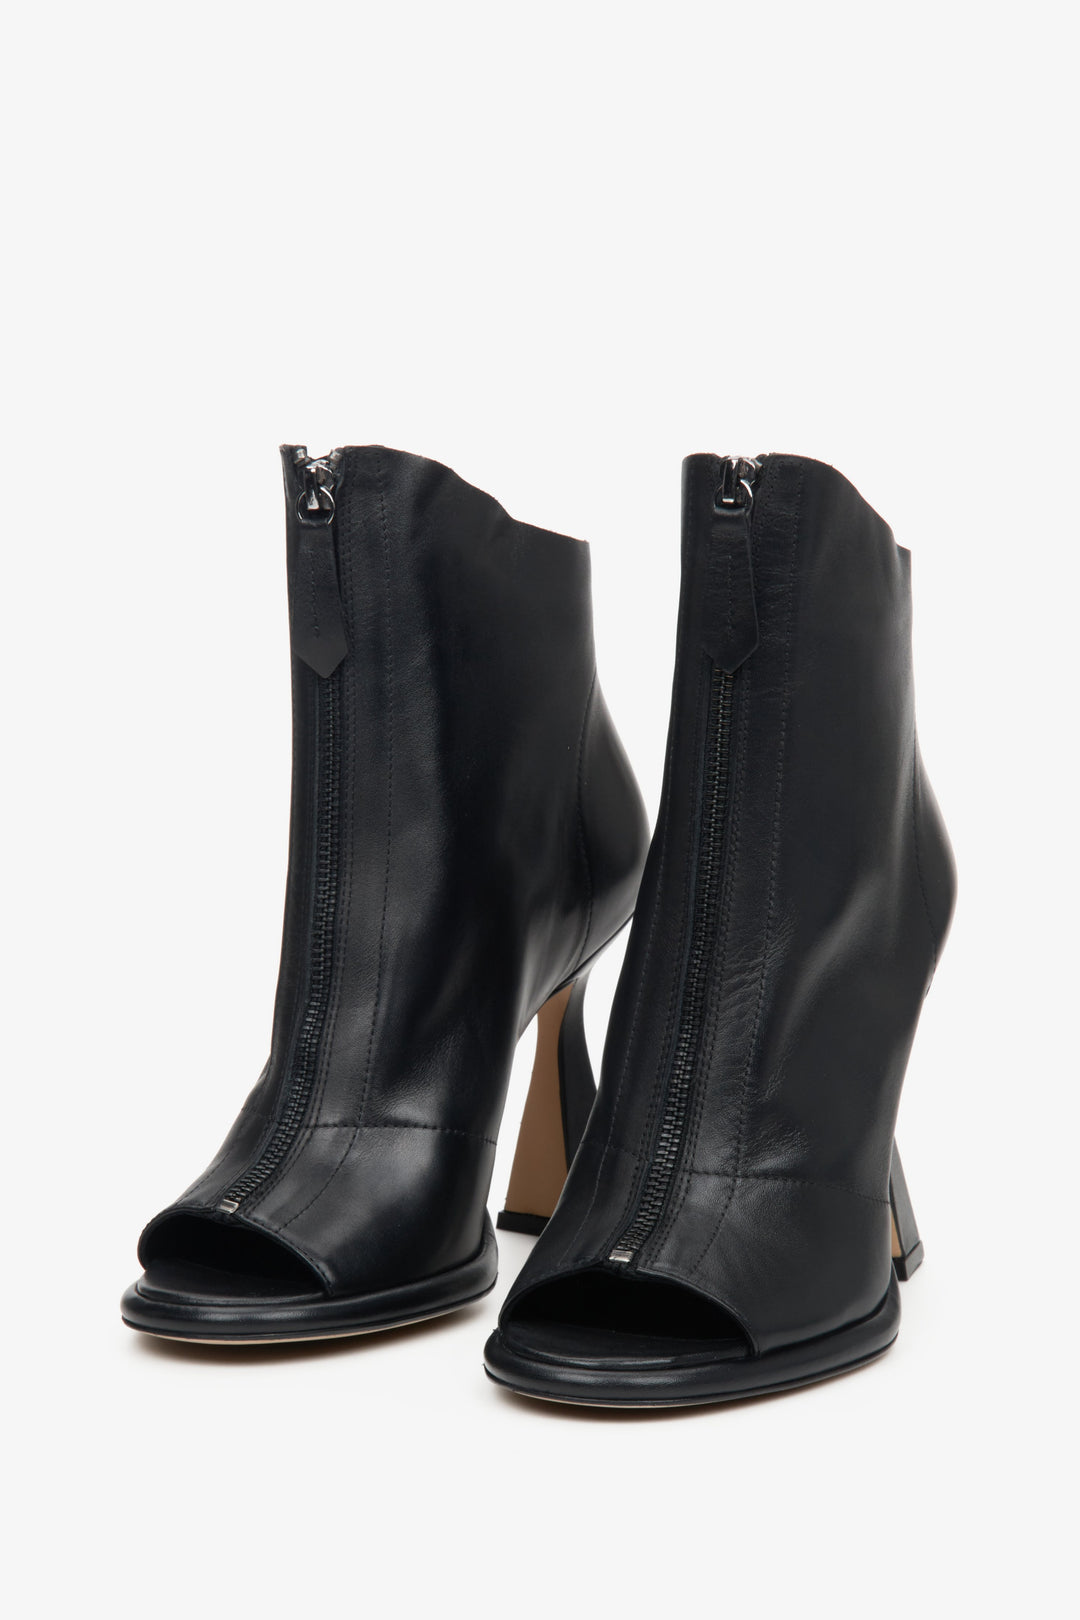 Women's heeled ankle boots made of natural leather in black with an open toe.